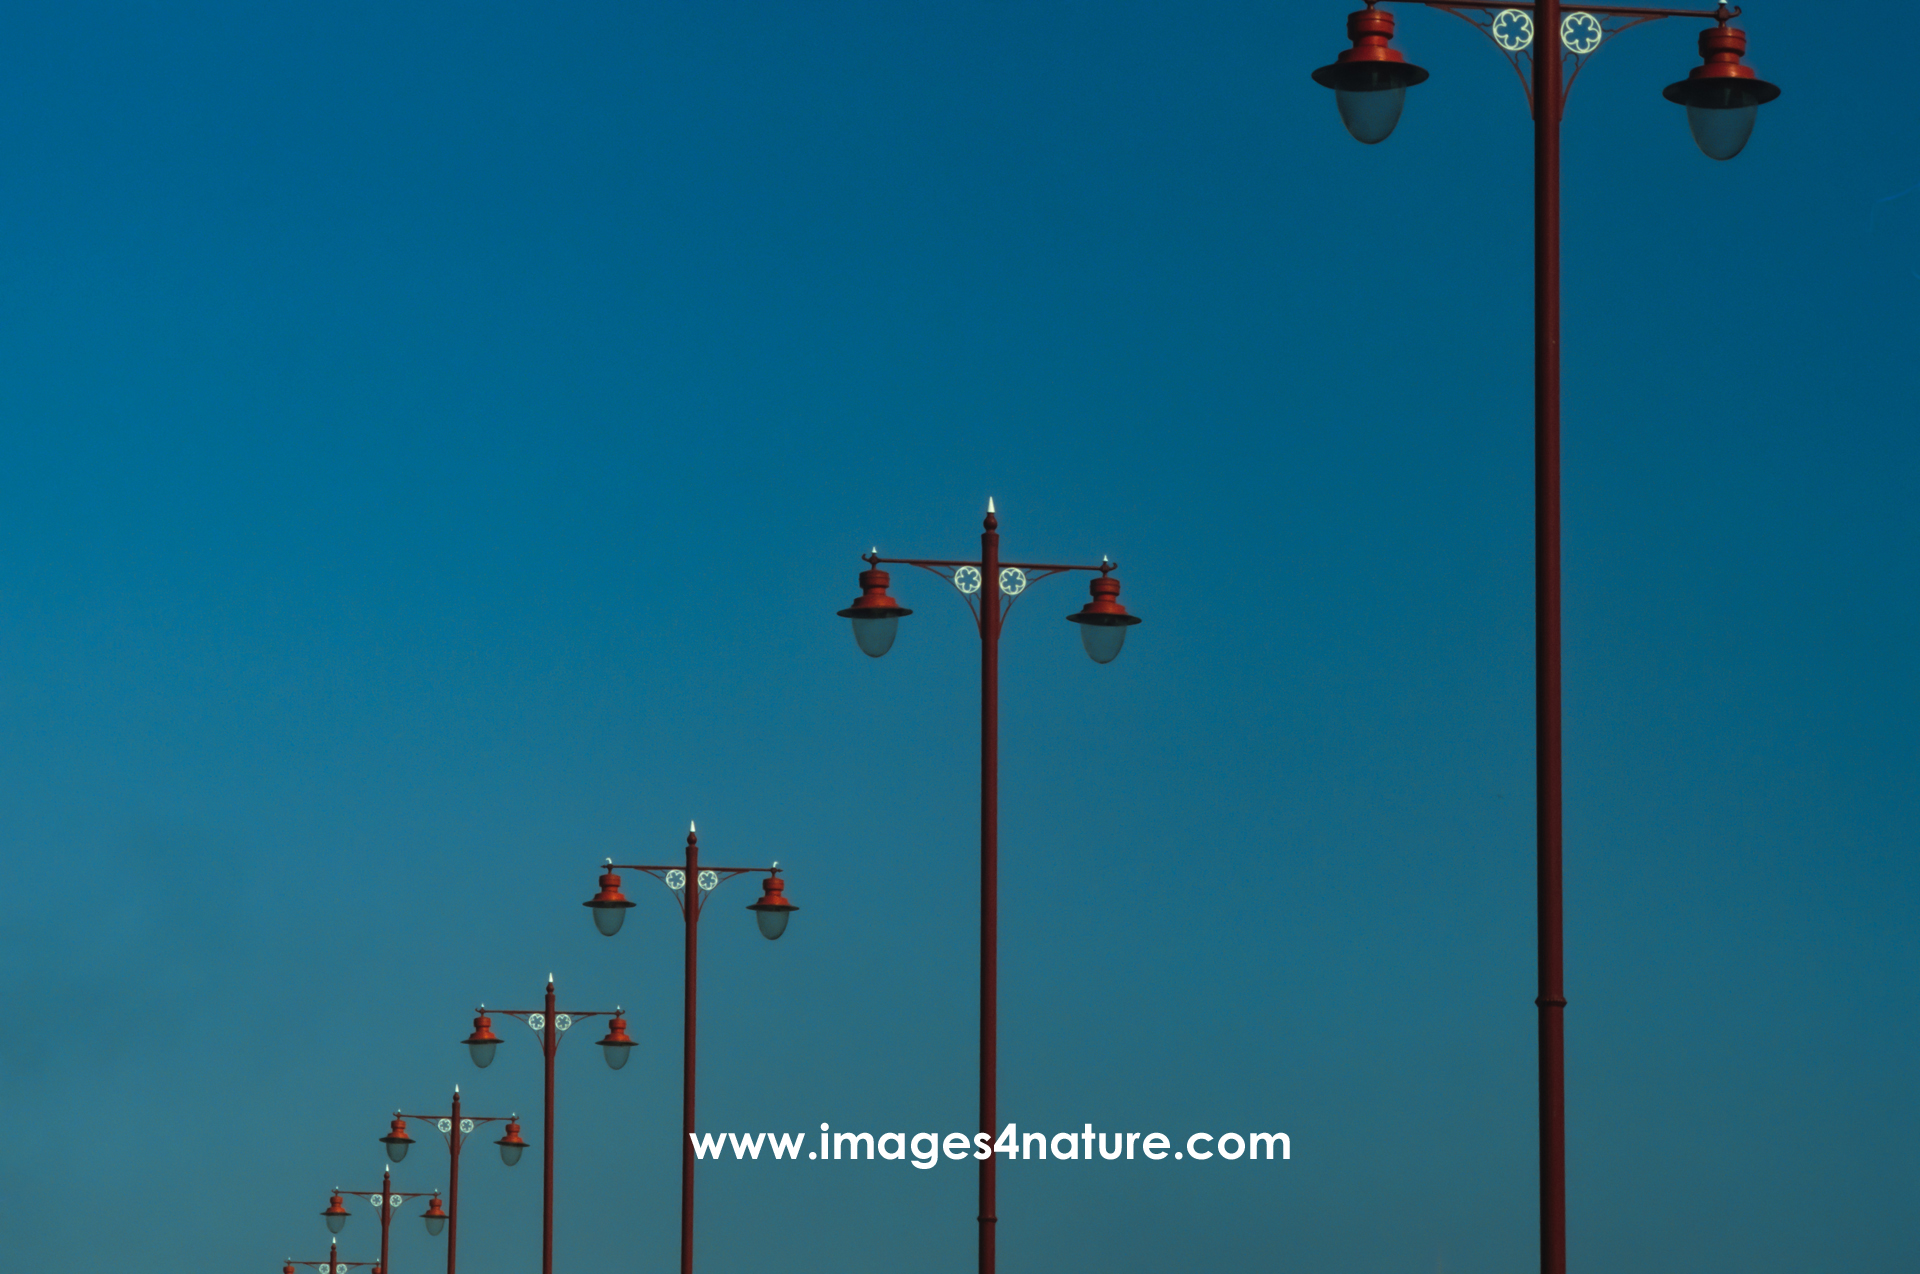 Six red double London street lamps against clear blue sky